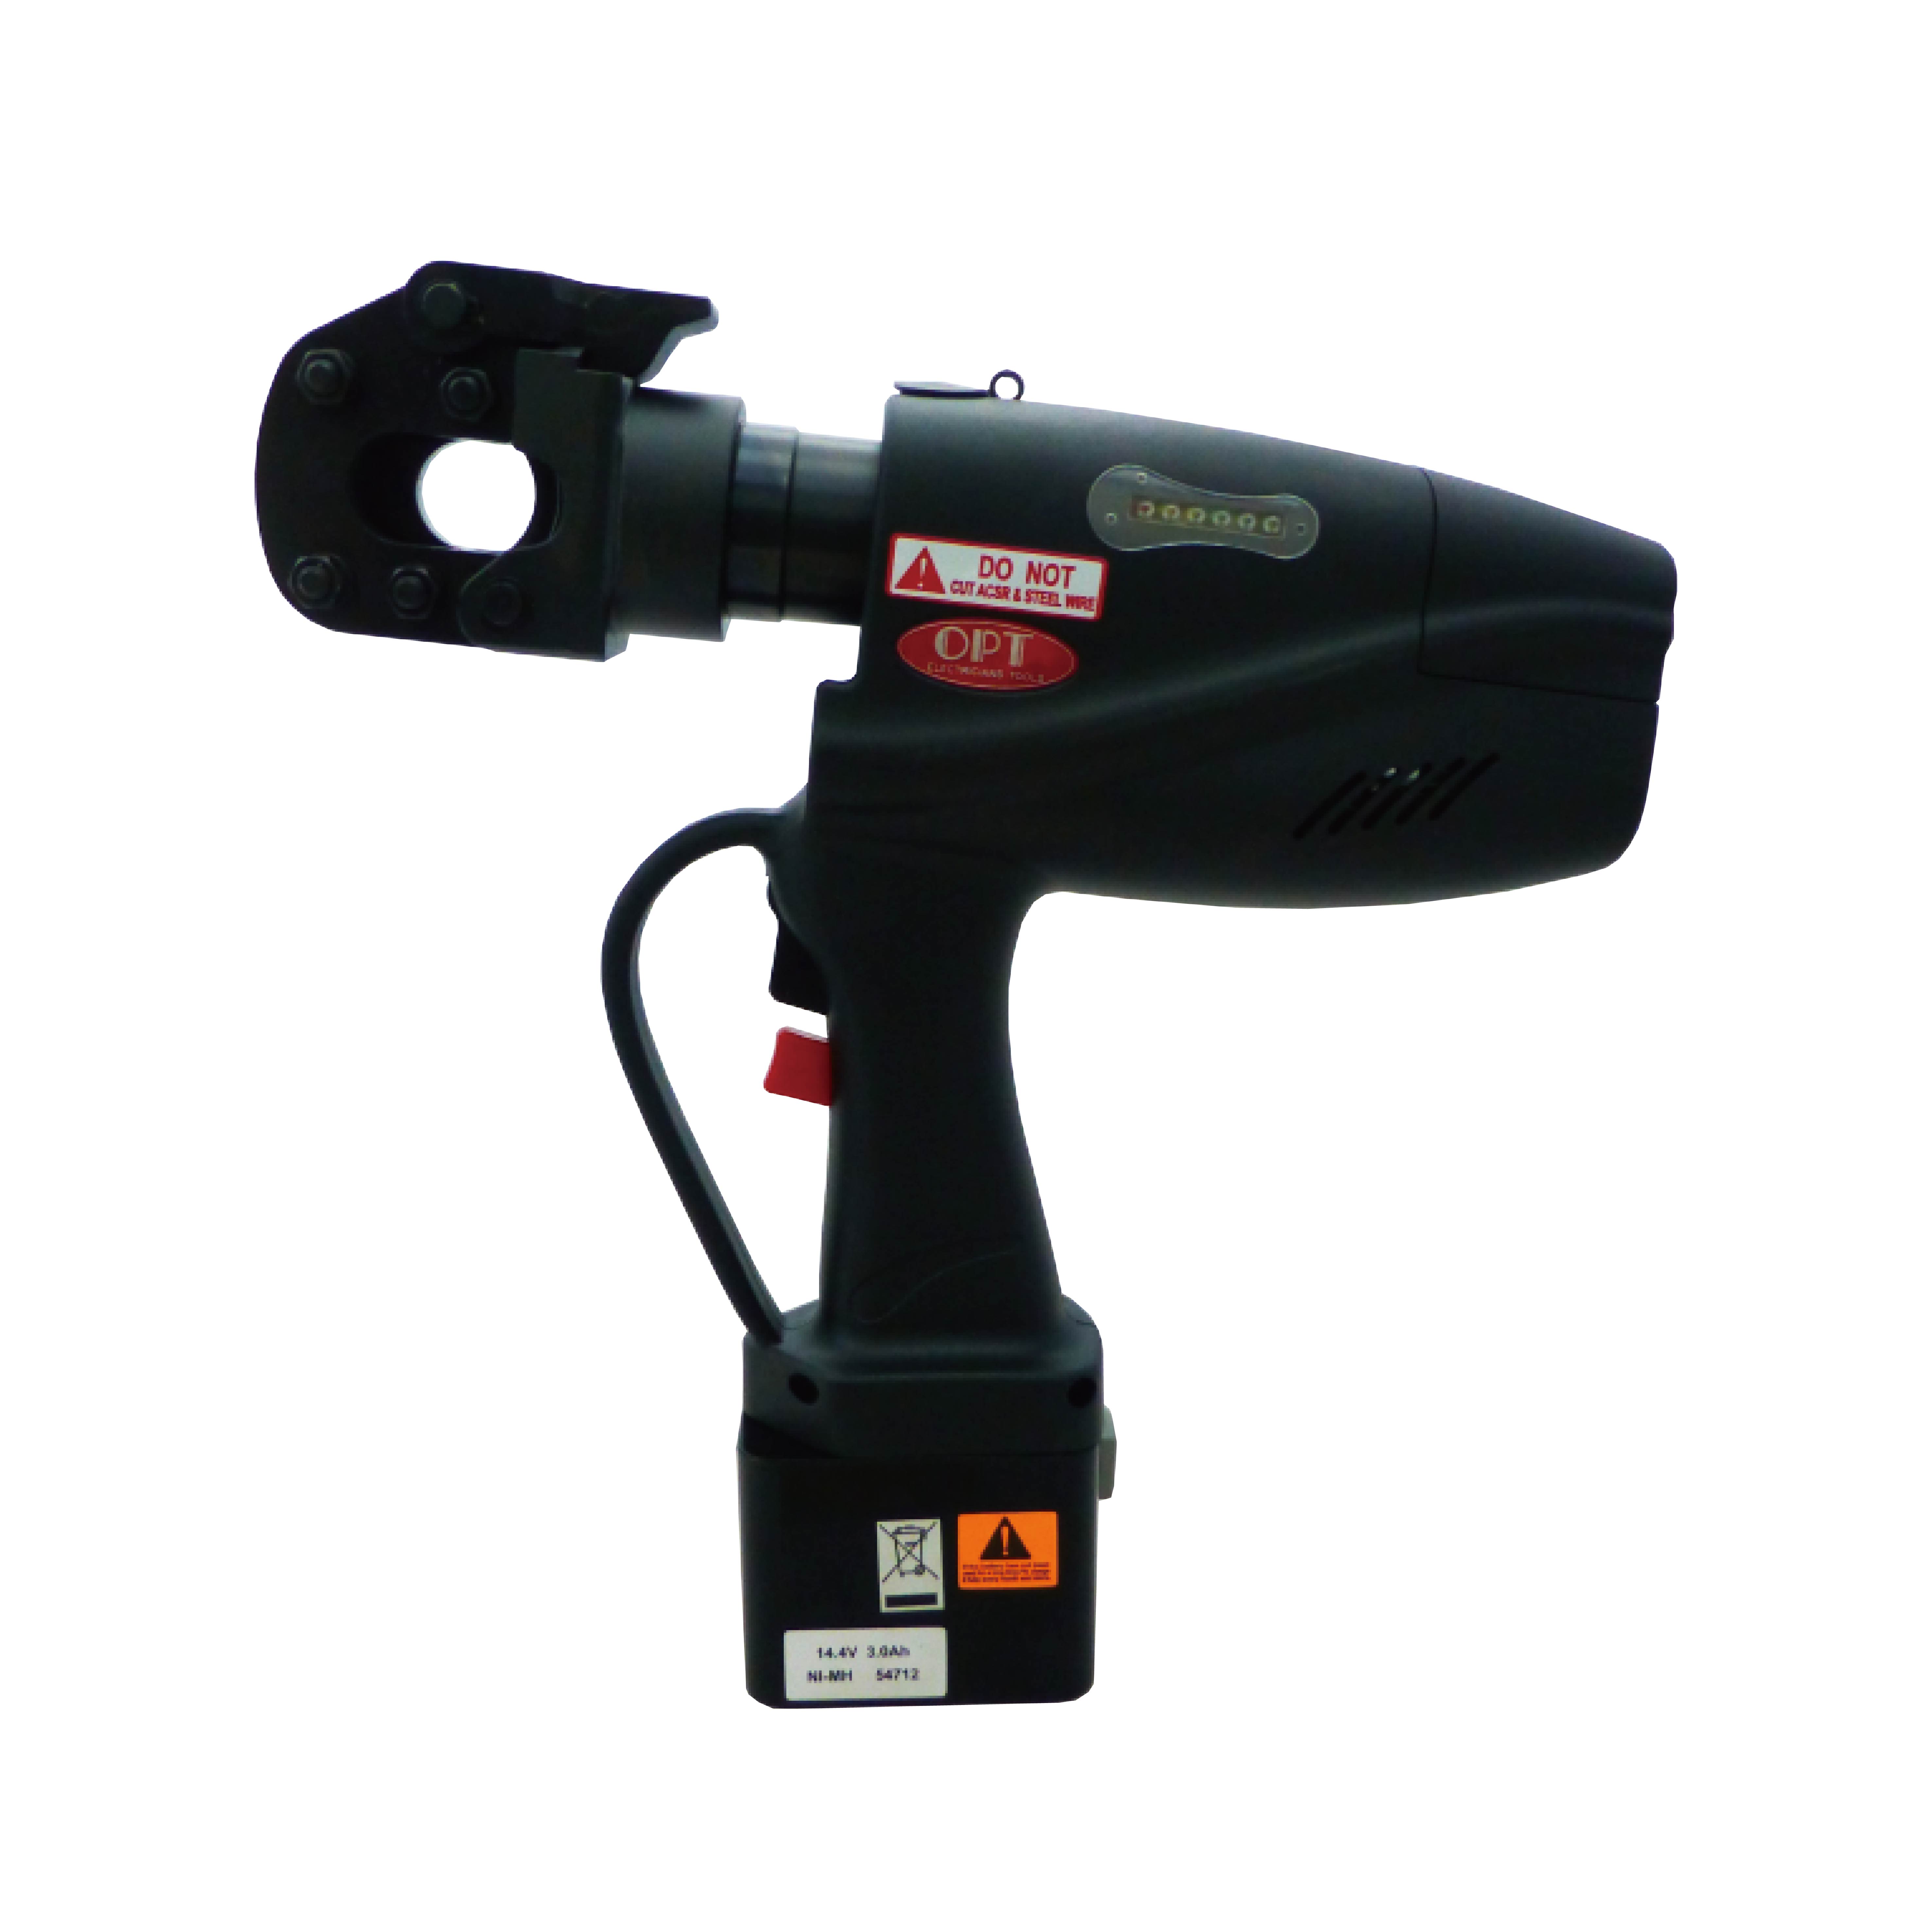 ECL-20 CORDLESS HYDRAULIC CABLE CUTTERS